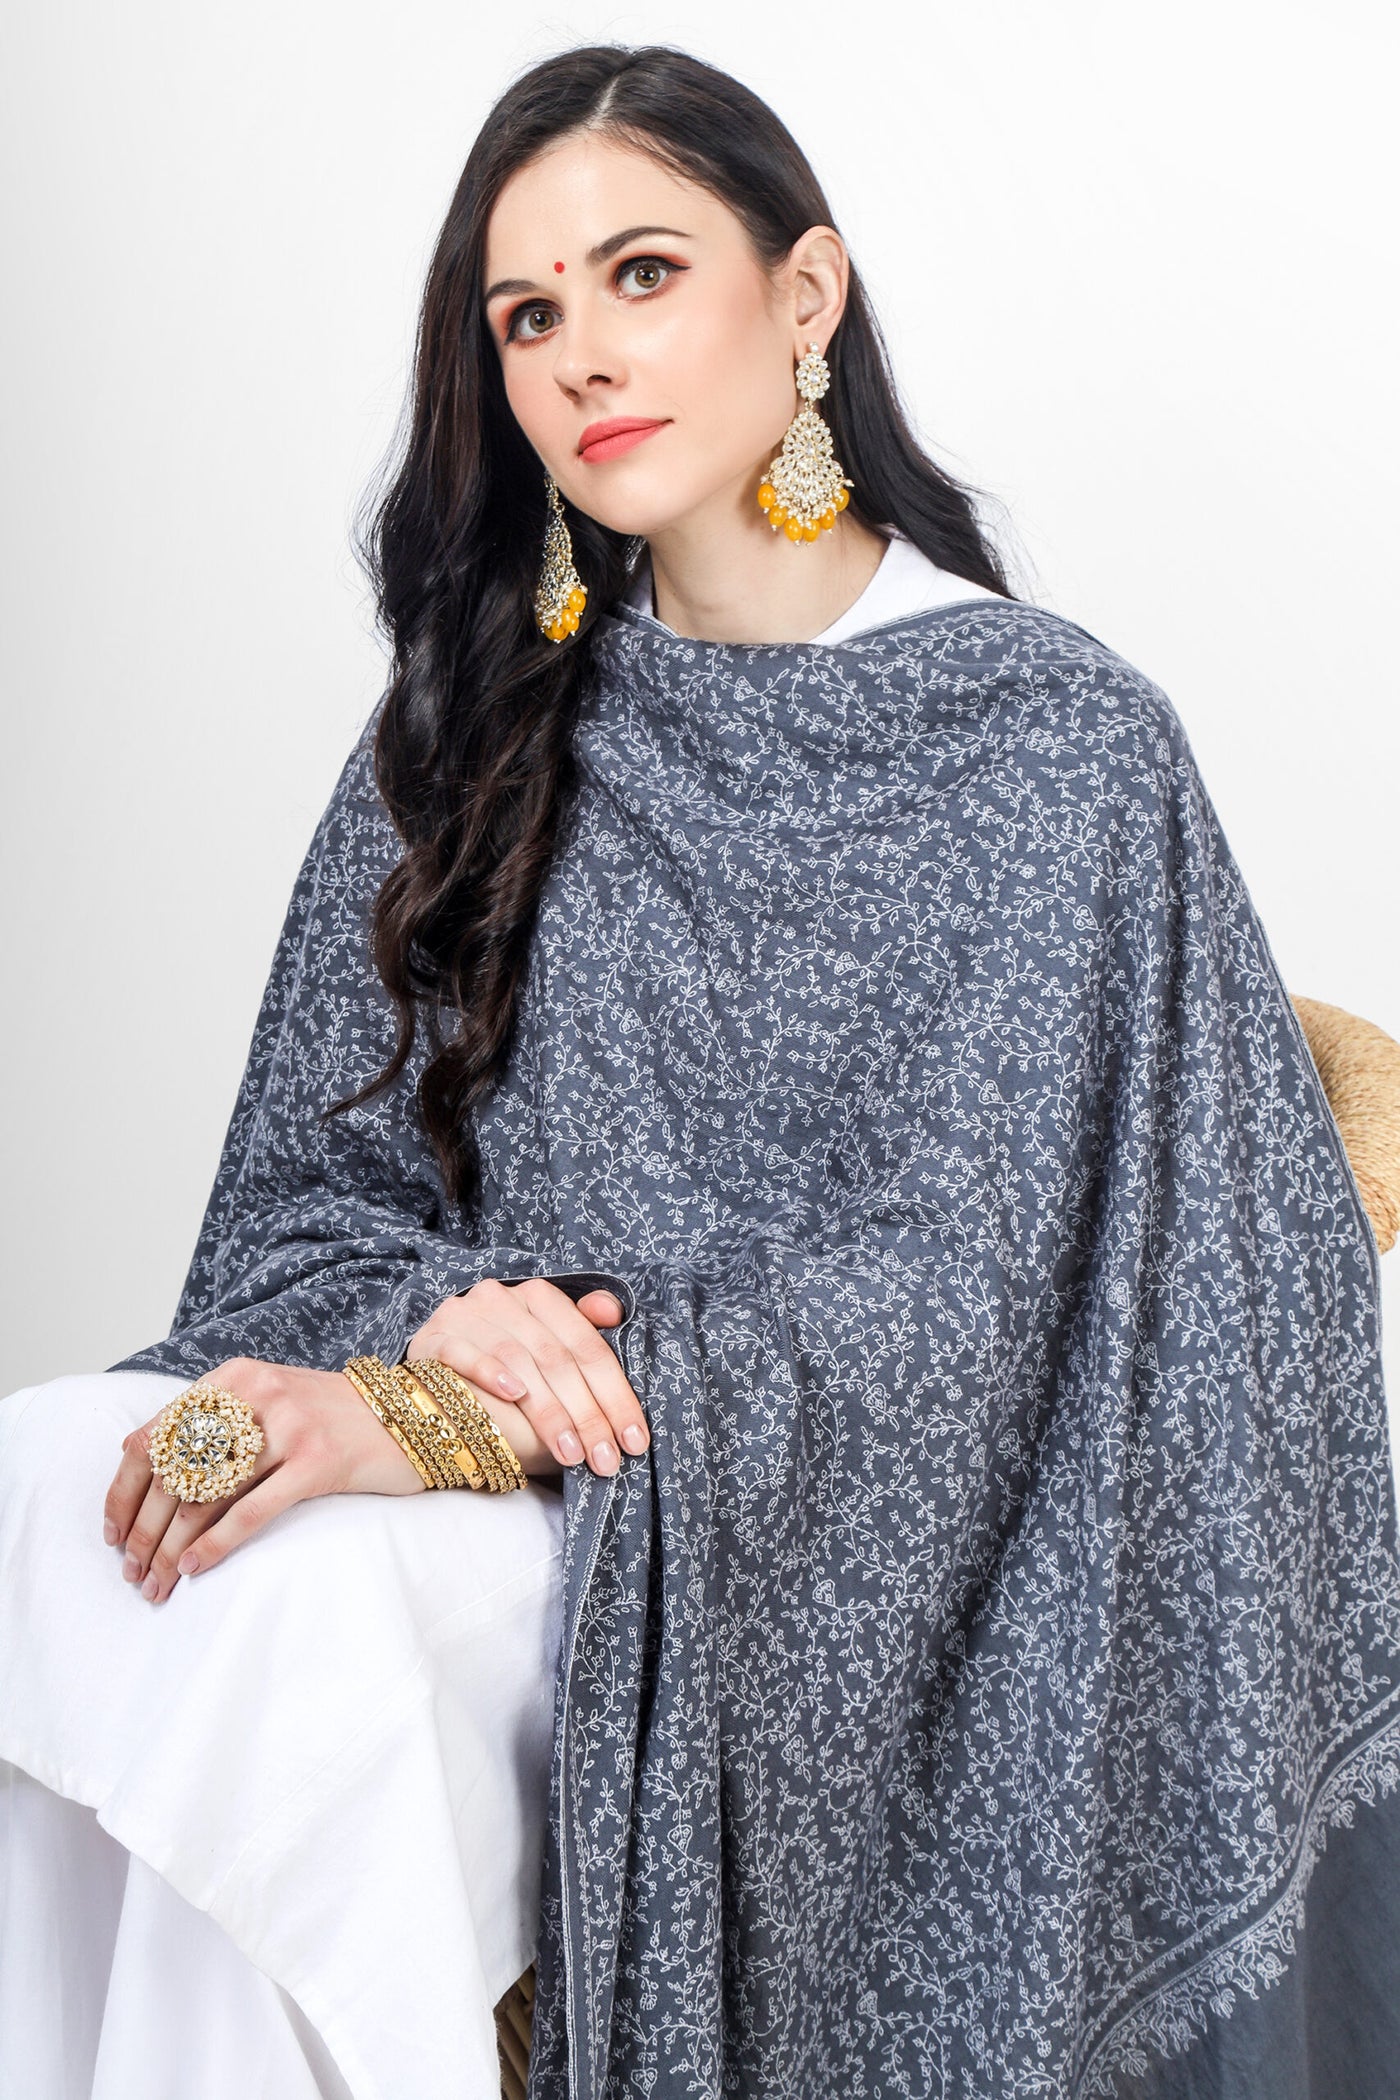 DUBAI  This Gray pashmina shawl Jaldaar can be draped over the shoulders to add a touch of elegance to any outfit. It can also be worn as a hijab or headscarf for a modest and stylish look. The intricate embroidery and unique pattern make this shawl a truly one-of-a-kind piece that is sure to impress.